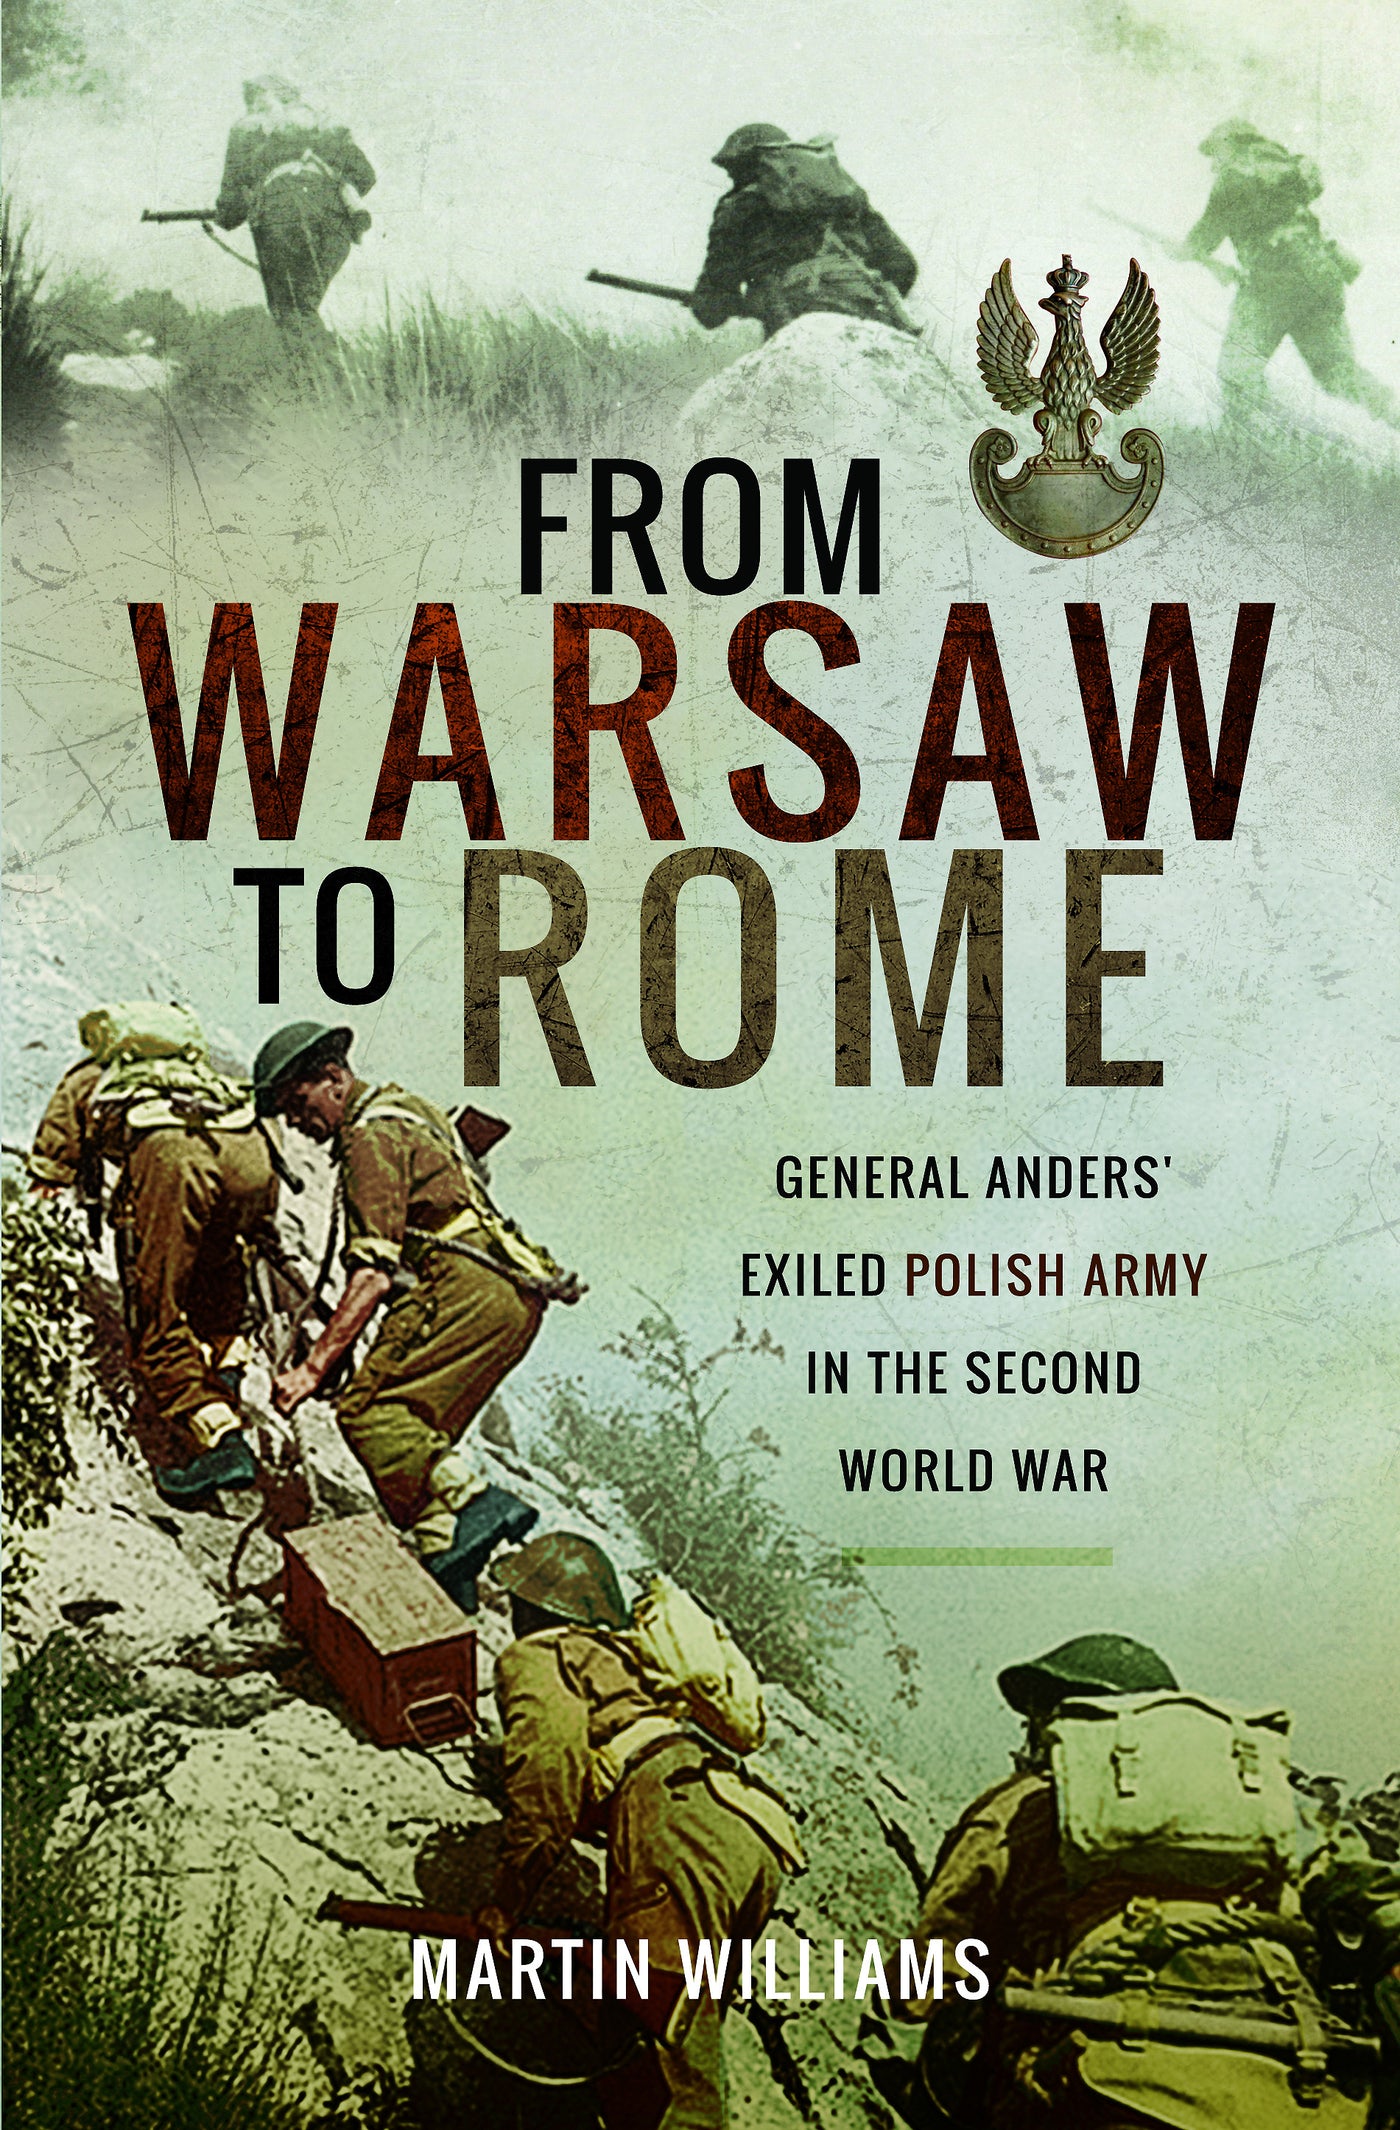 From Warsaw to Rome